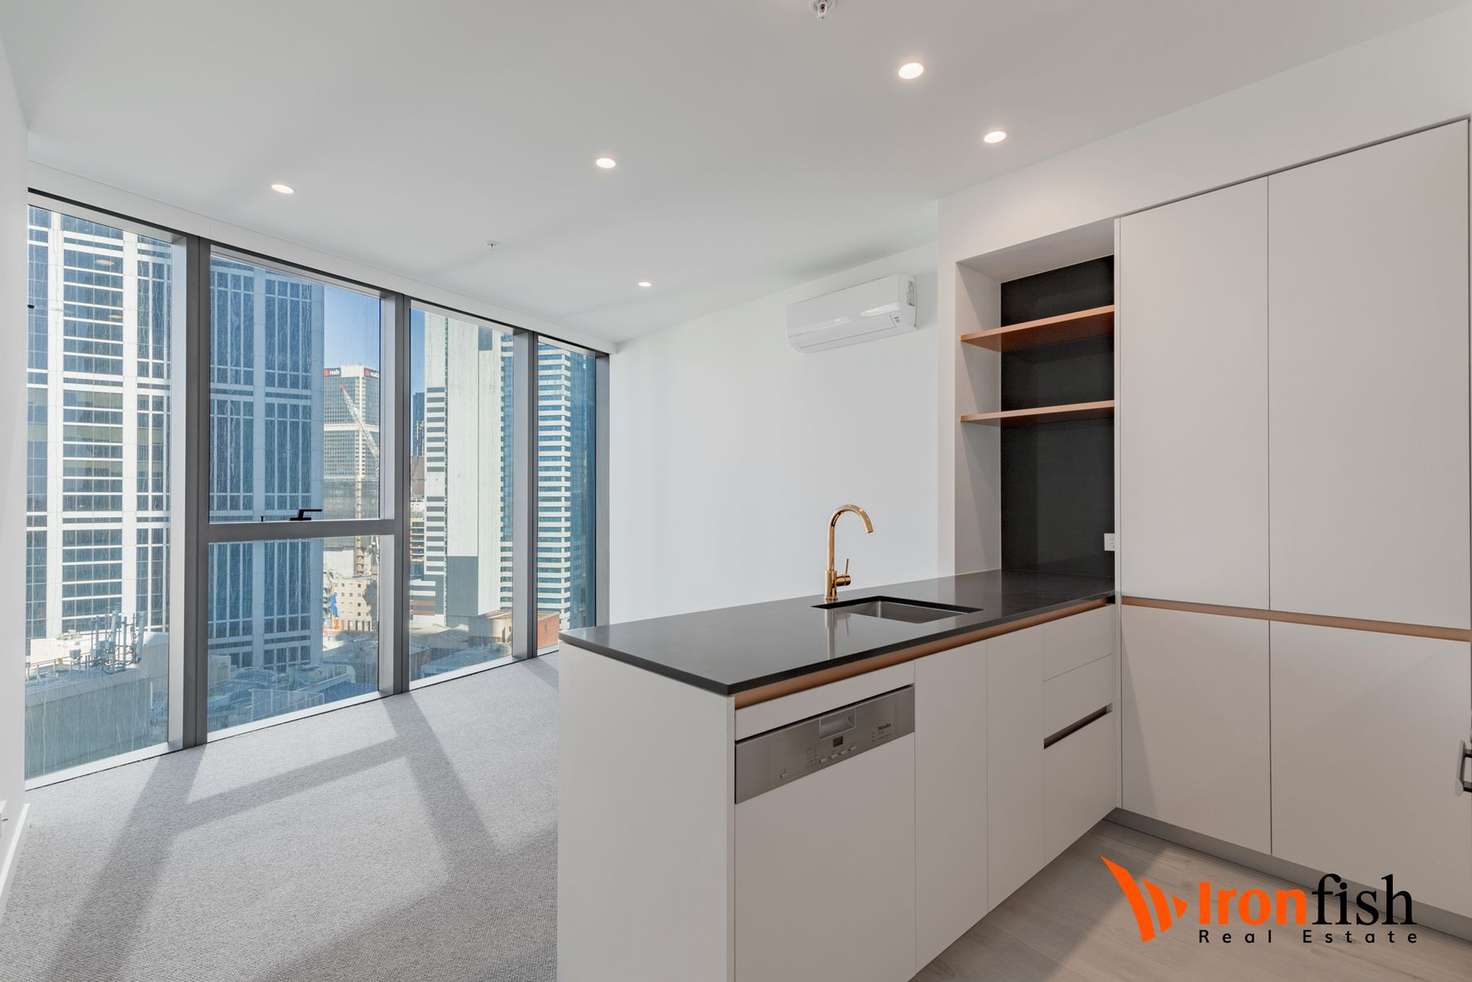 Main view of Homely apartment listing, 2910/224-252 La Trobe Street, Melbourne VIC 3000